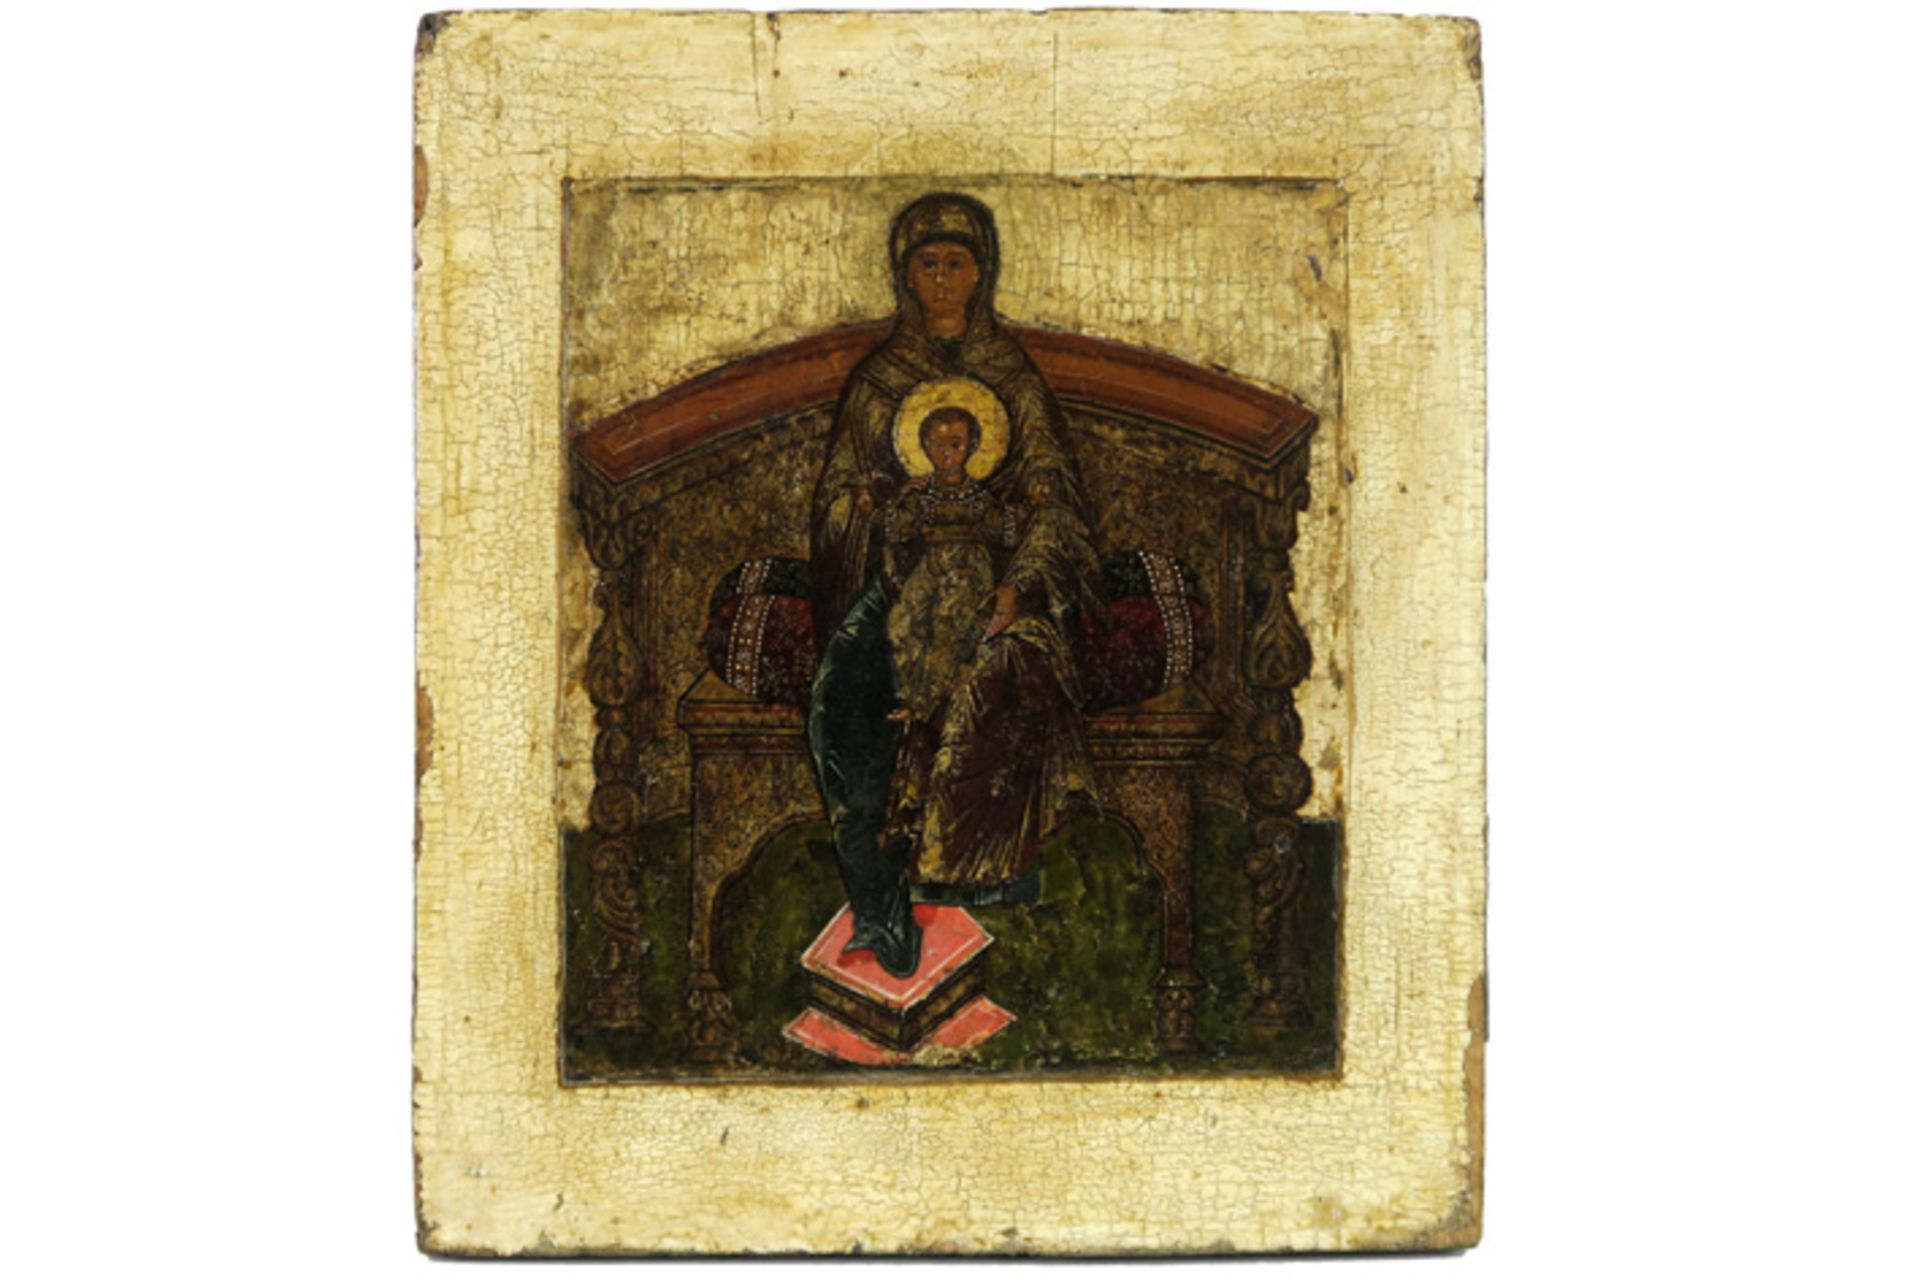 late 17th Cent. Russian "Mother of God" icon - with certificate RUSLAND - EIND 17° EEUW ikoon : "